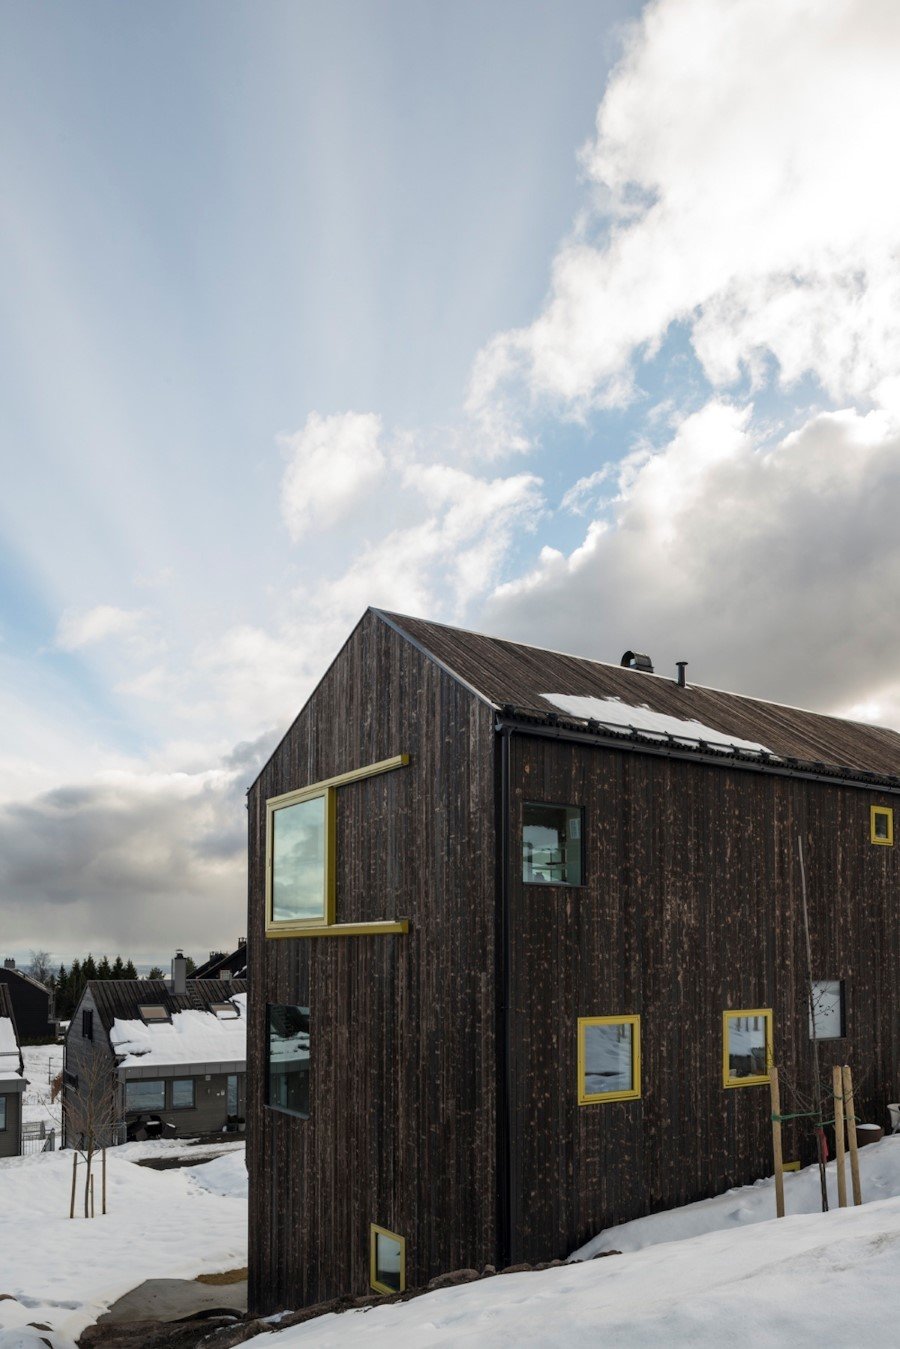 Single family wood house “on top of Oslo” (7)